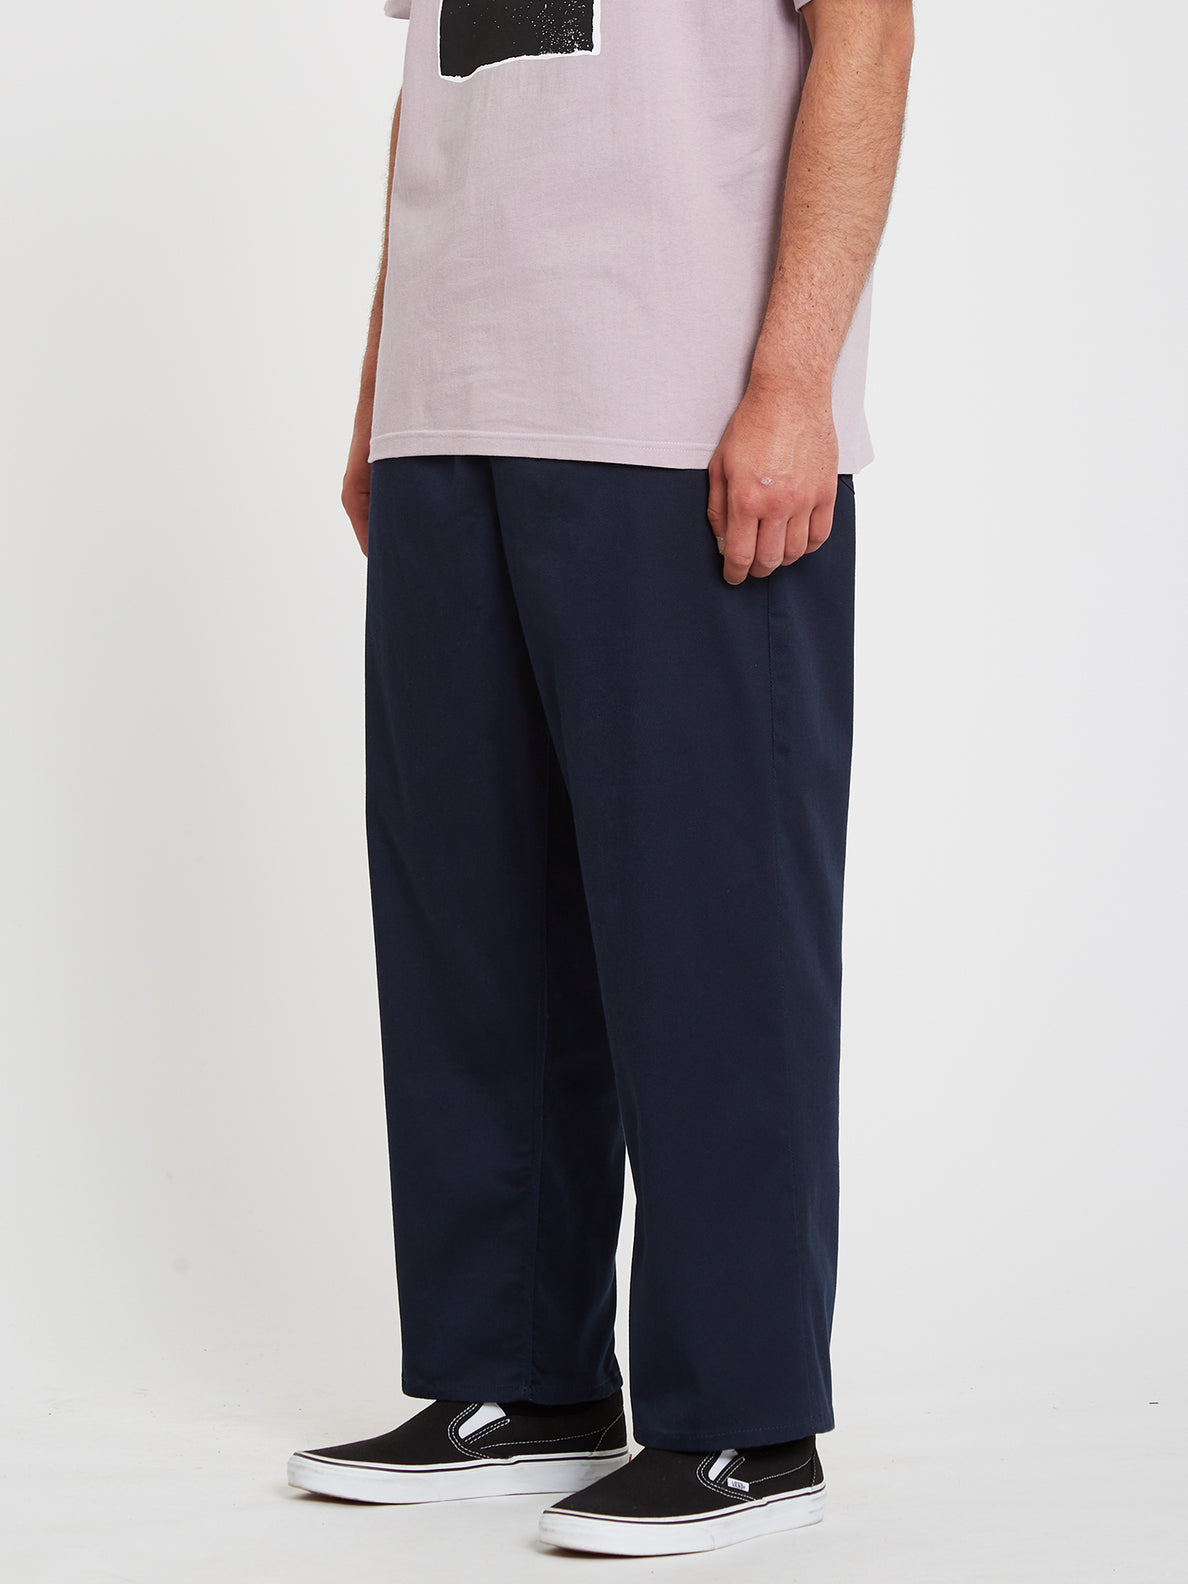 OUTER SPACED SOLID EW PANT - NAVY (A1242004_NVY) [1]